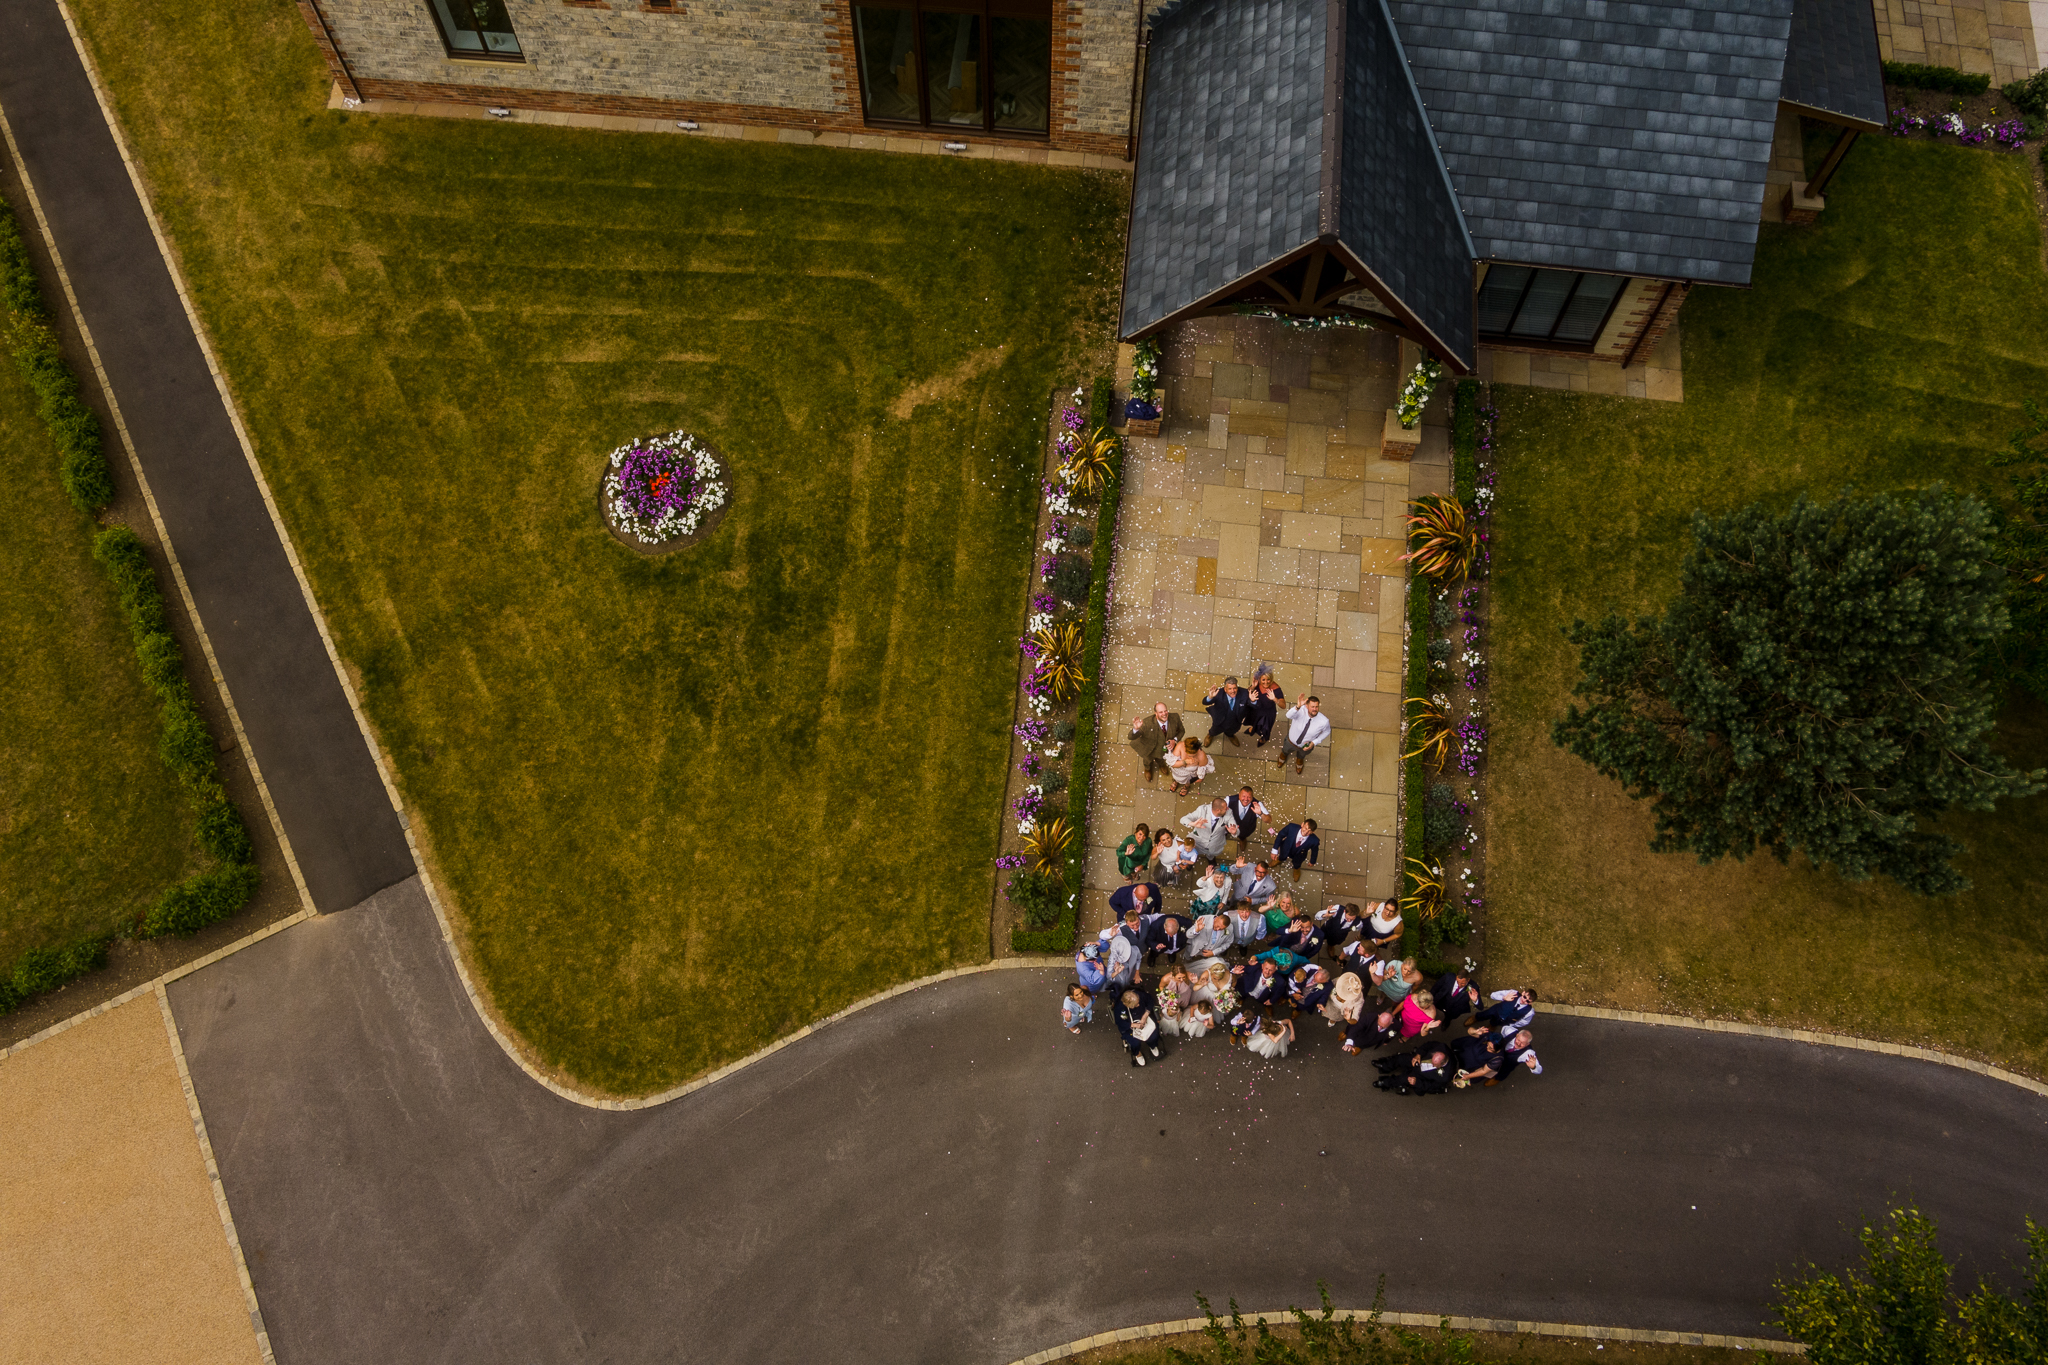 ariel view of guests throwing confetti on the bride and groom